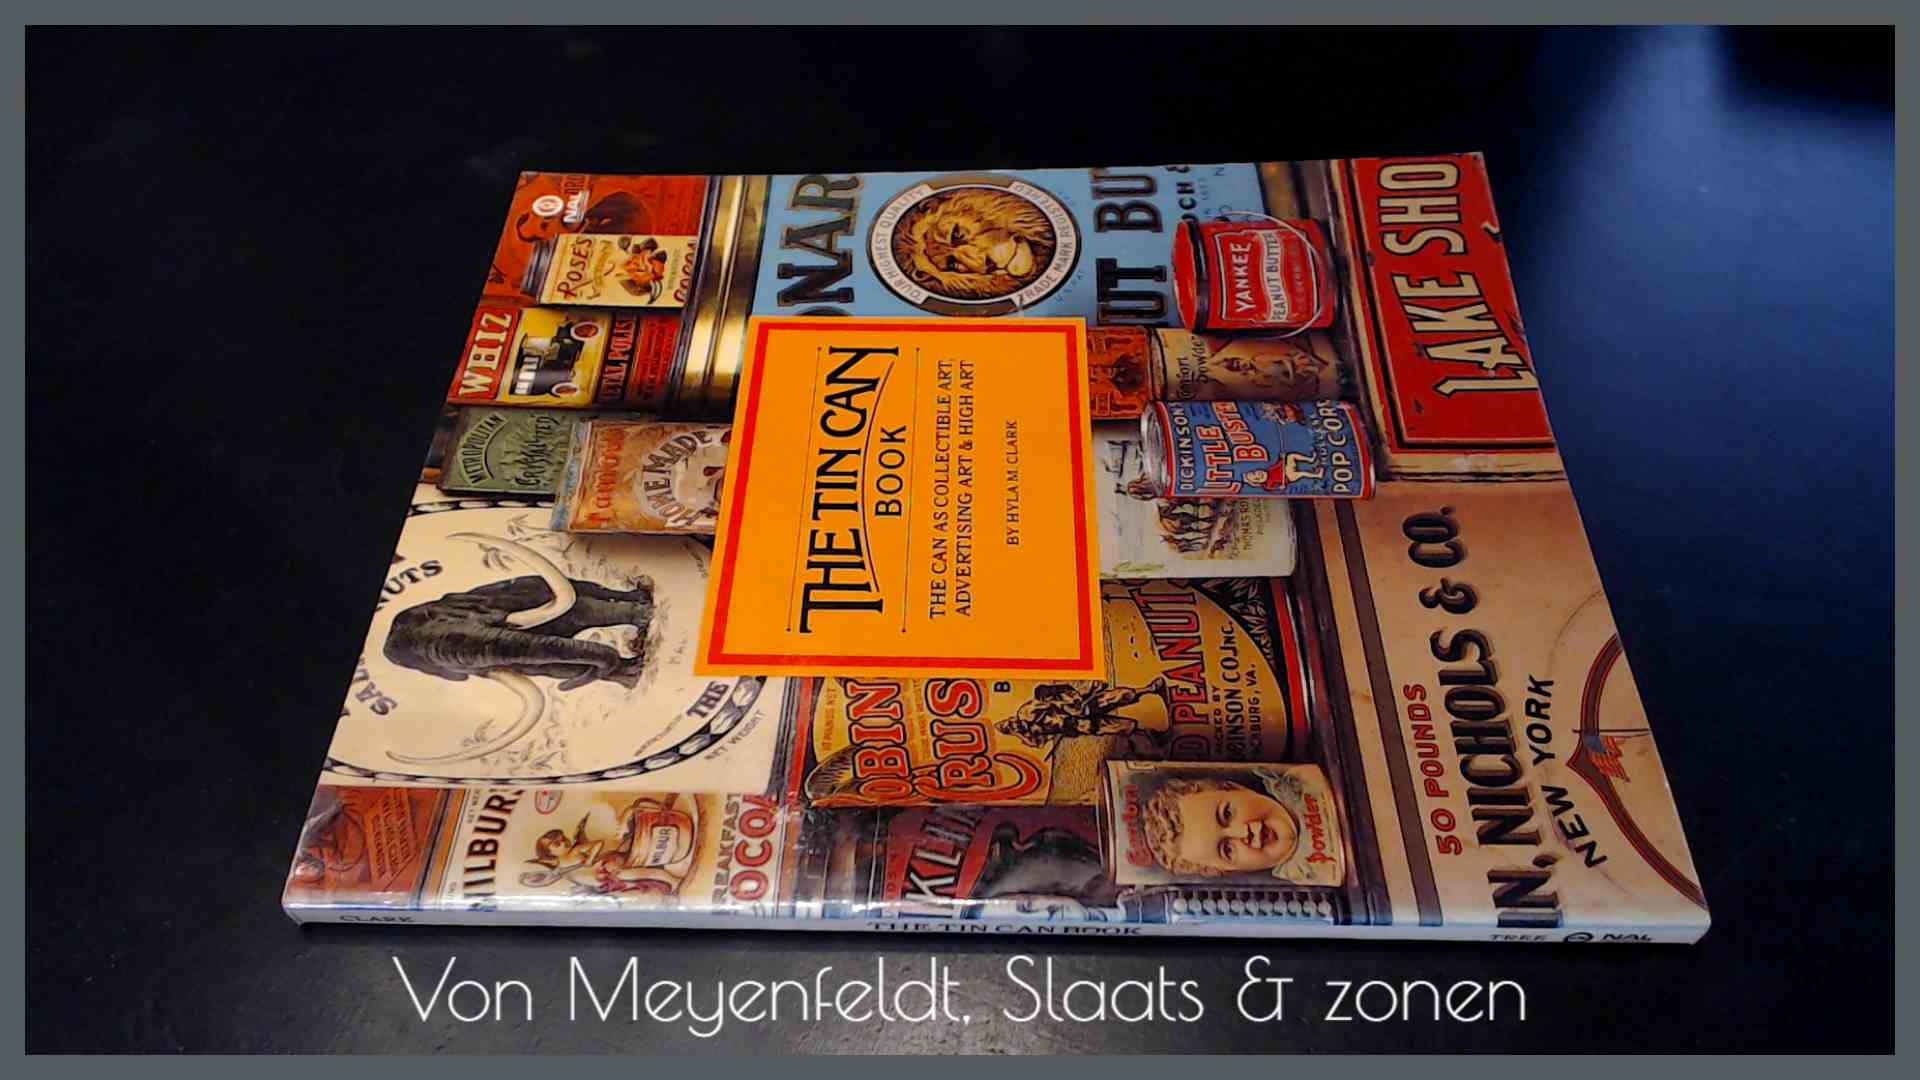 CLARK, HYLA M. - The Tin Can book - The Can as collectible art, advertising art & high art